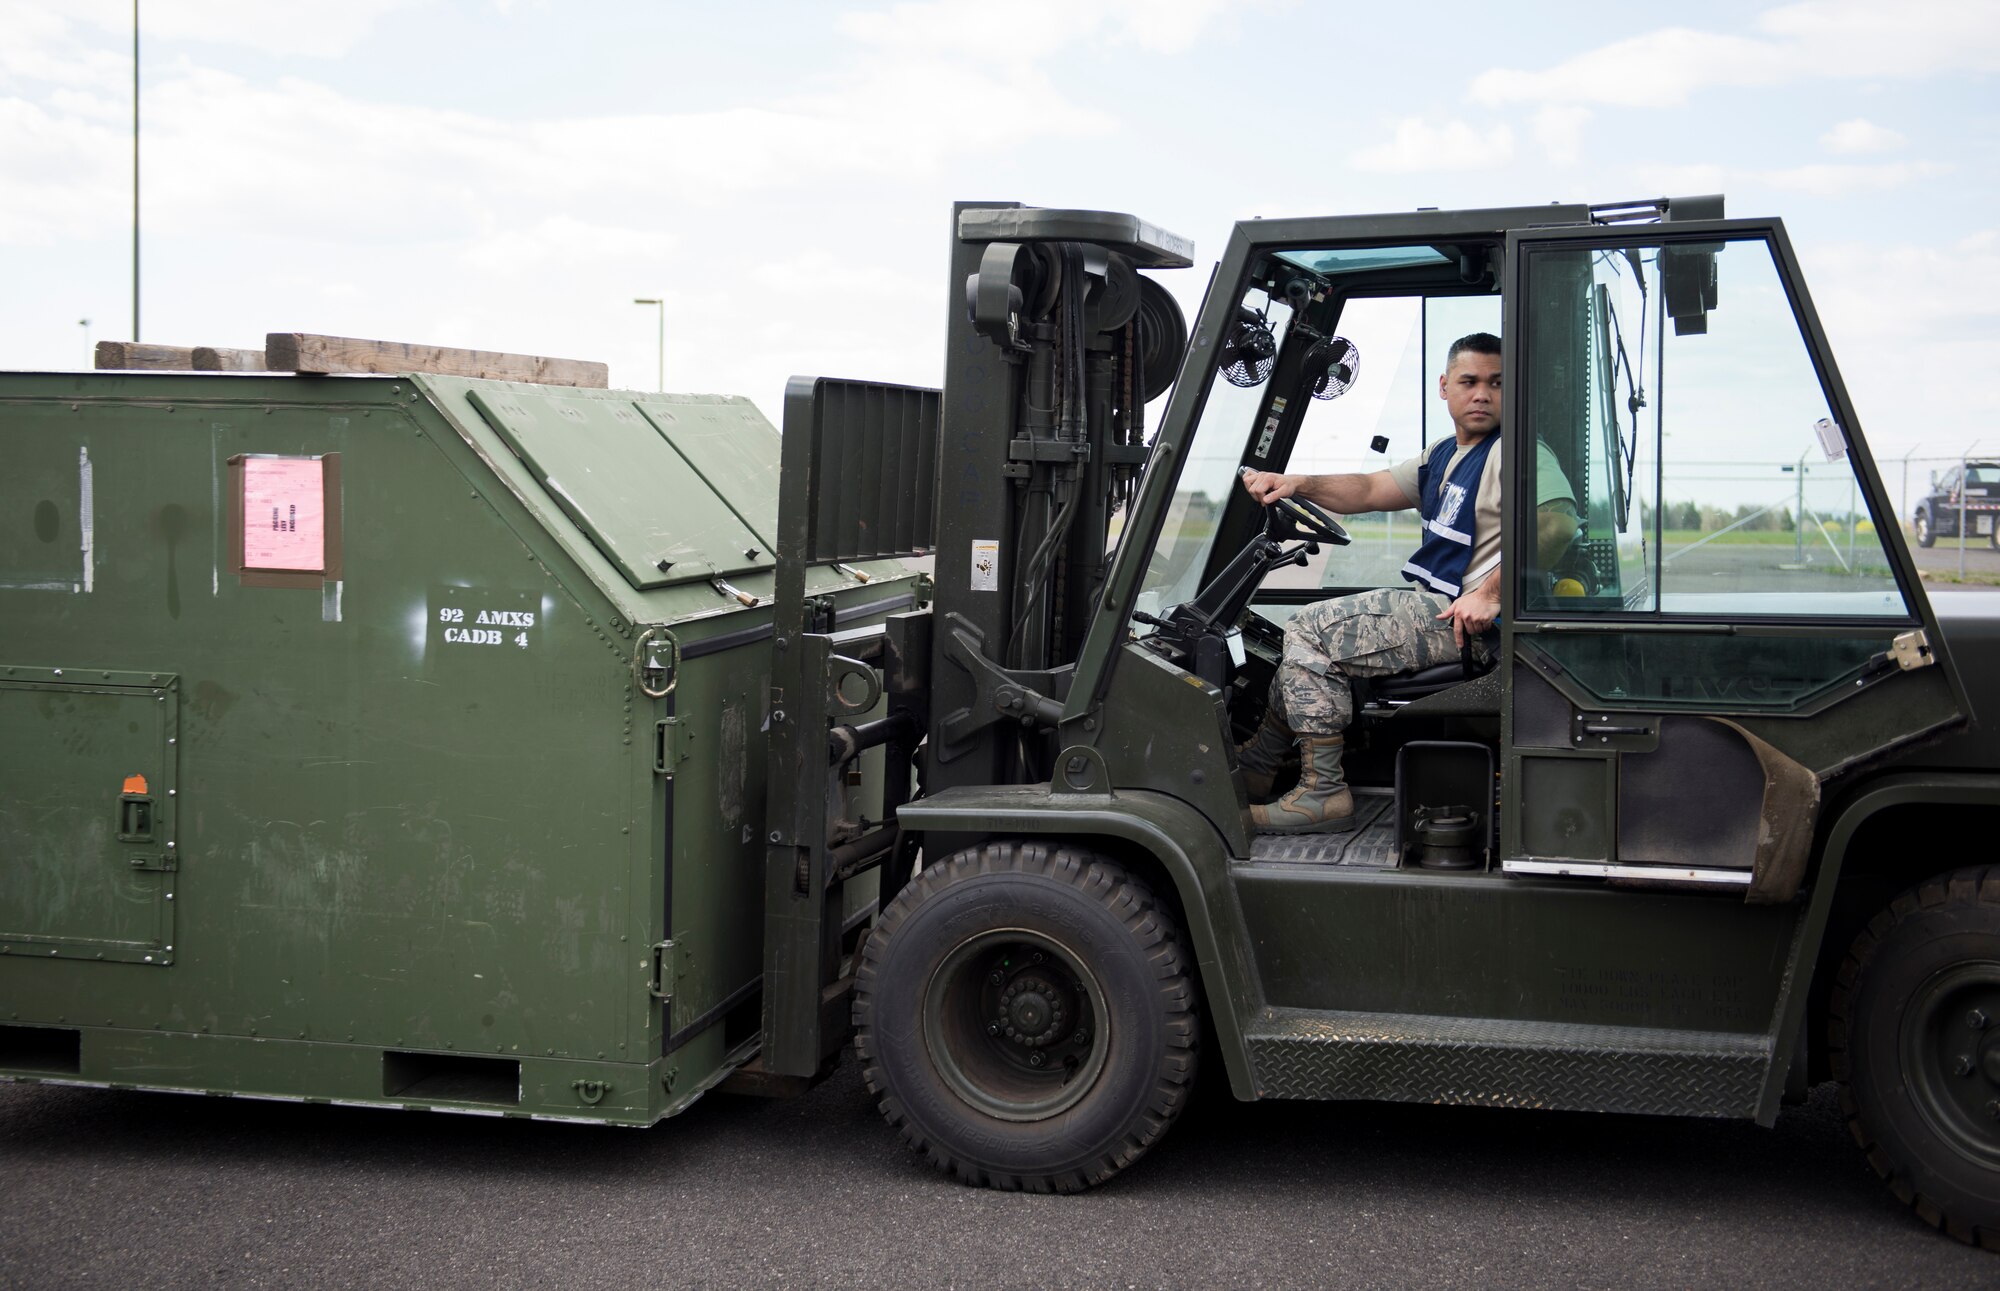 Tech. Sgt. Jaymhar Caoile, 92nd Logistics Readiness Squadron assistant resource advisor, operates a forklift during an exercise at Fairchild Air Force Base, Washington, May 2, 2018. The Cargo Deployment Function process involves more than just paperwork; it involves preparing baggage pallets, marshalling and driving forklifts, weighing and measuring cargo and checking hazardous material. (U.S. Air Force Photo/Senior Airman Sean Campbell)